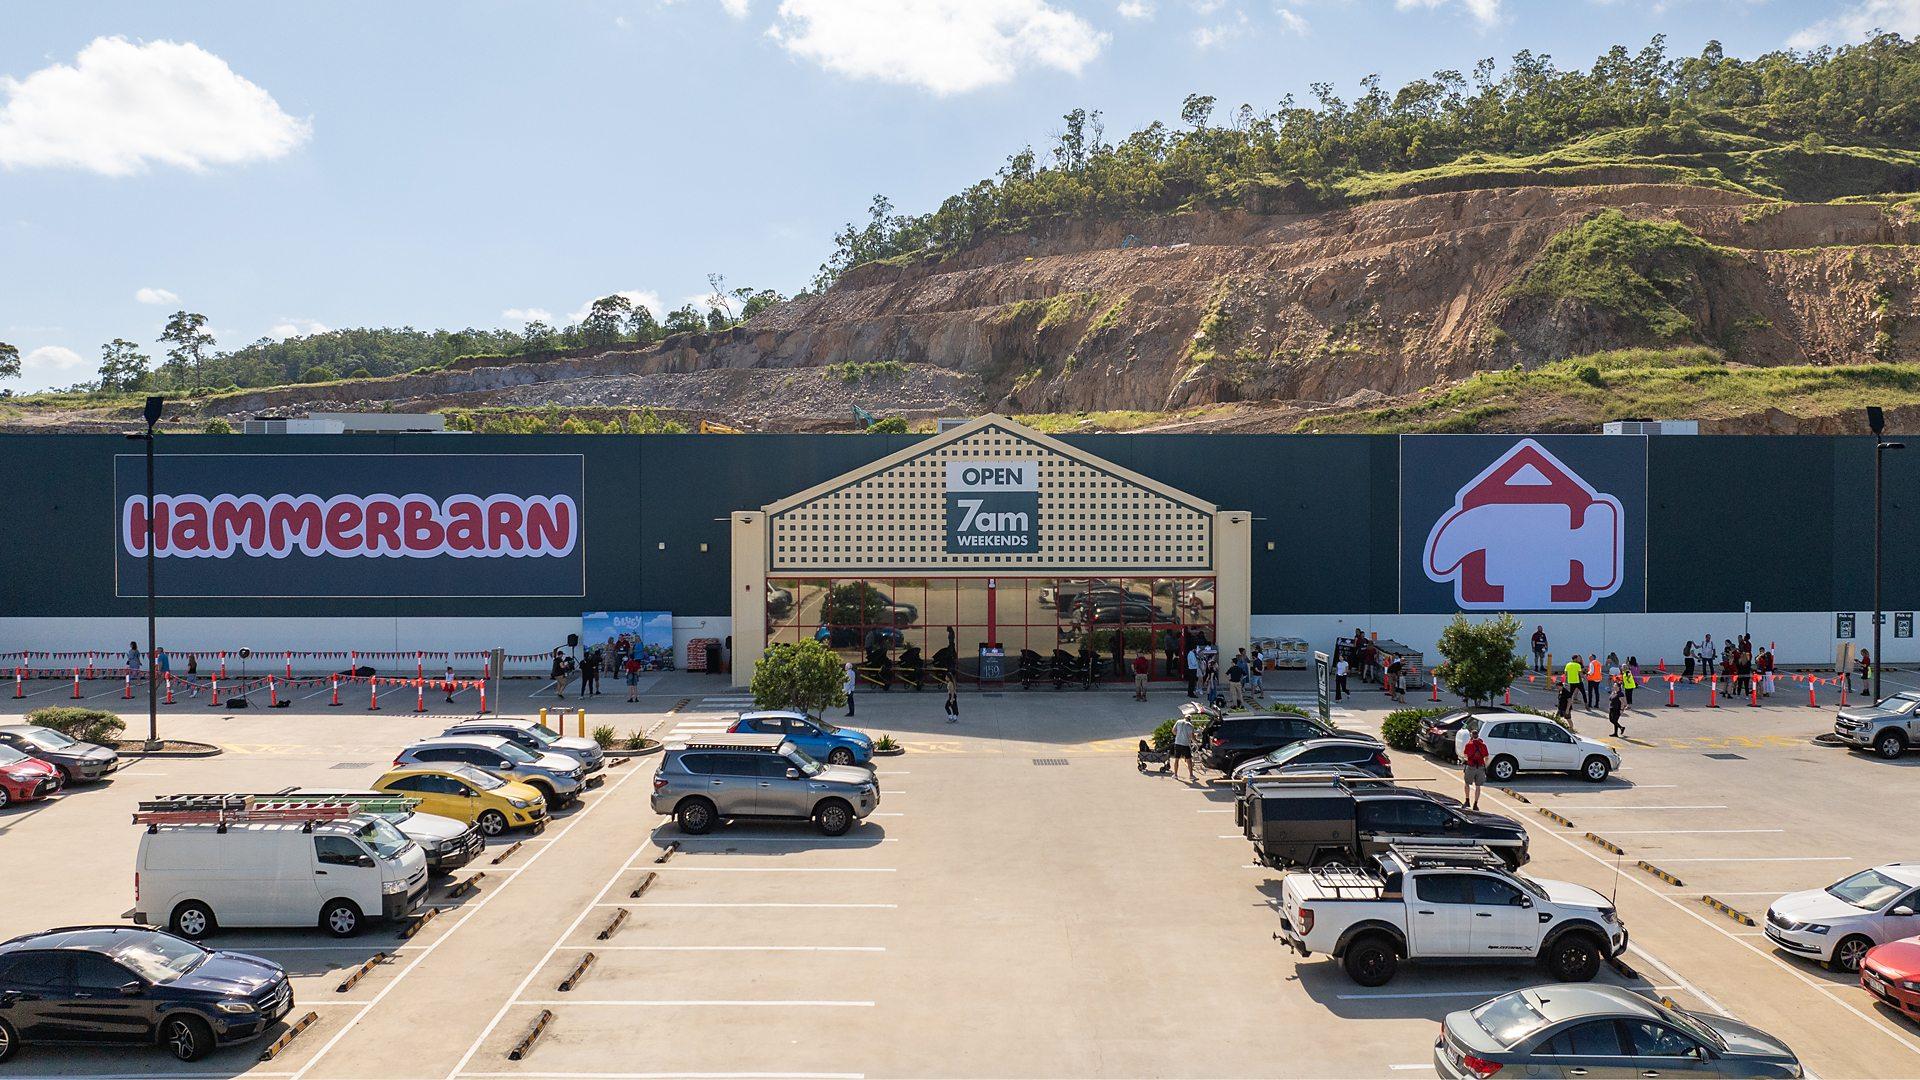 Exterior of the Bunnings hardware store in the Brisbane suburb of Keperra with the Hammerbarn name and logo.